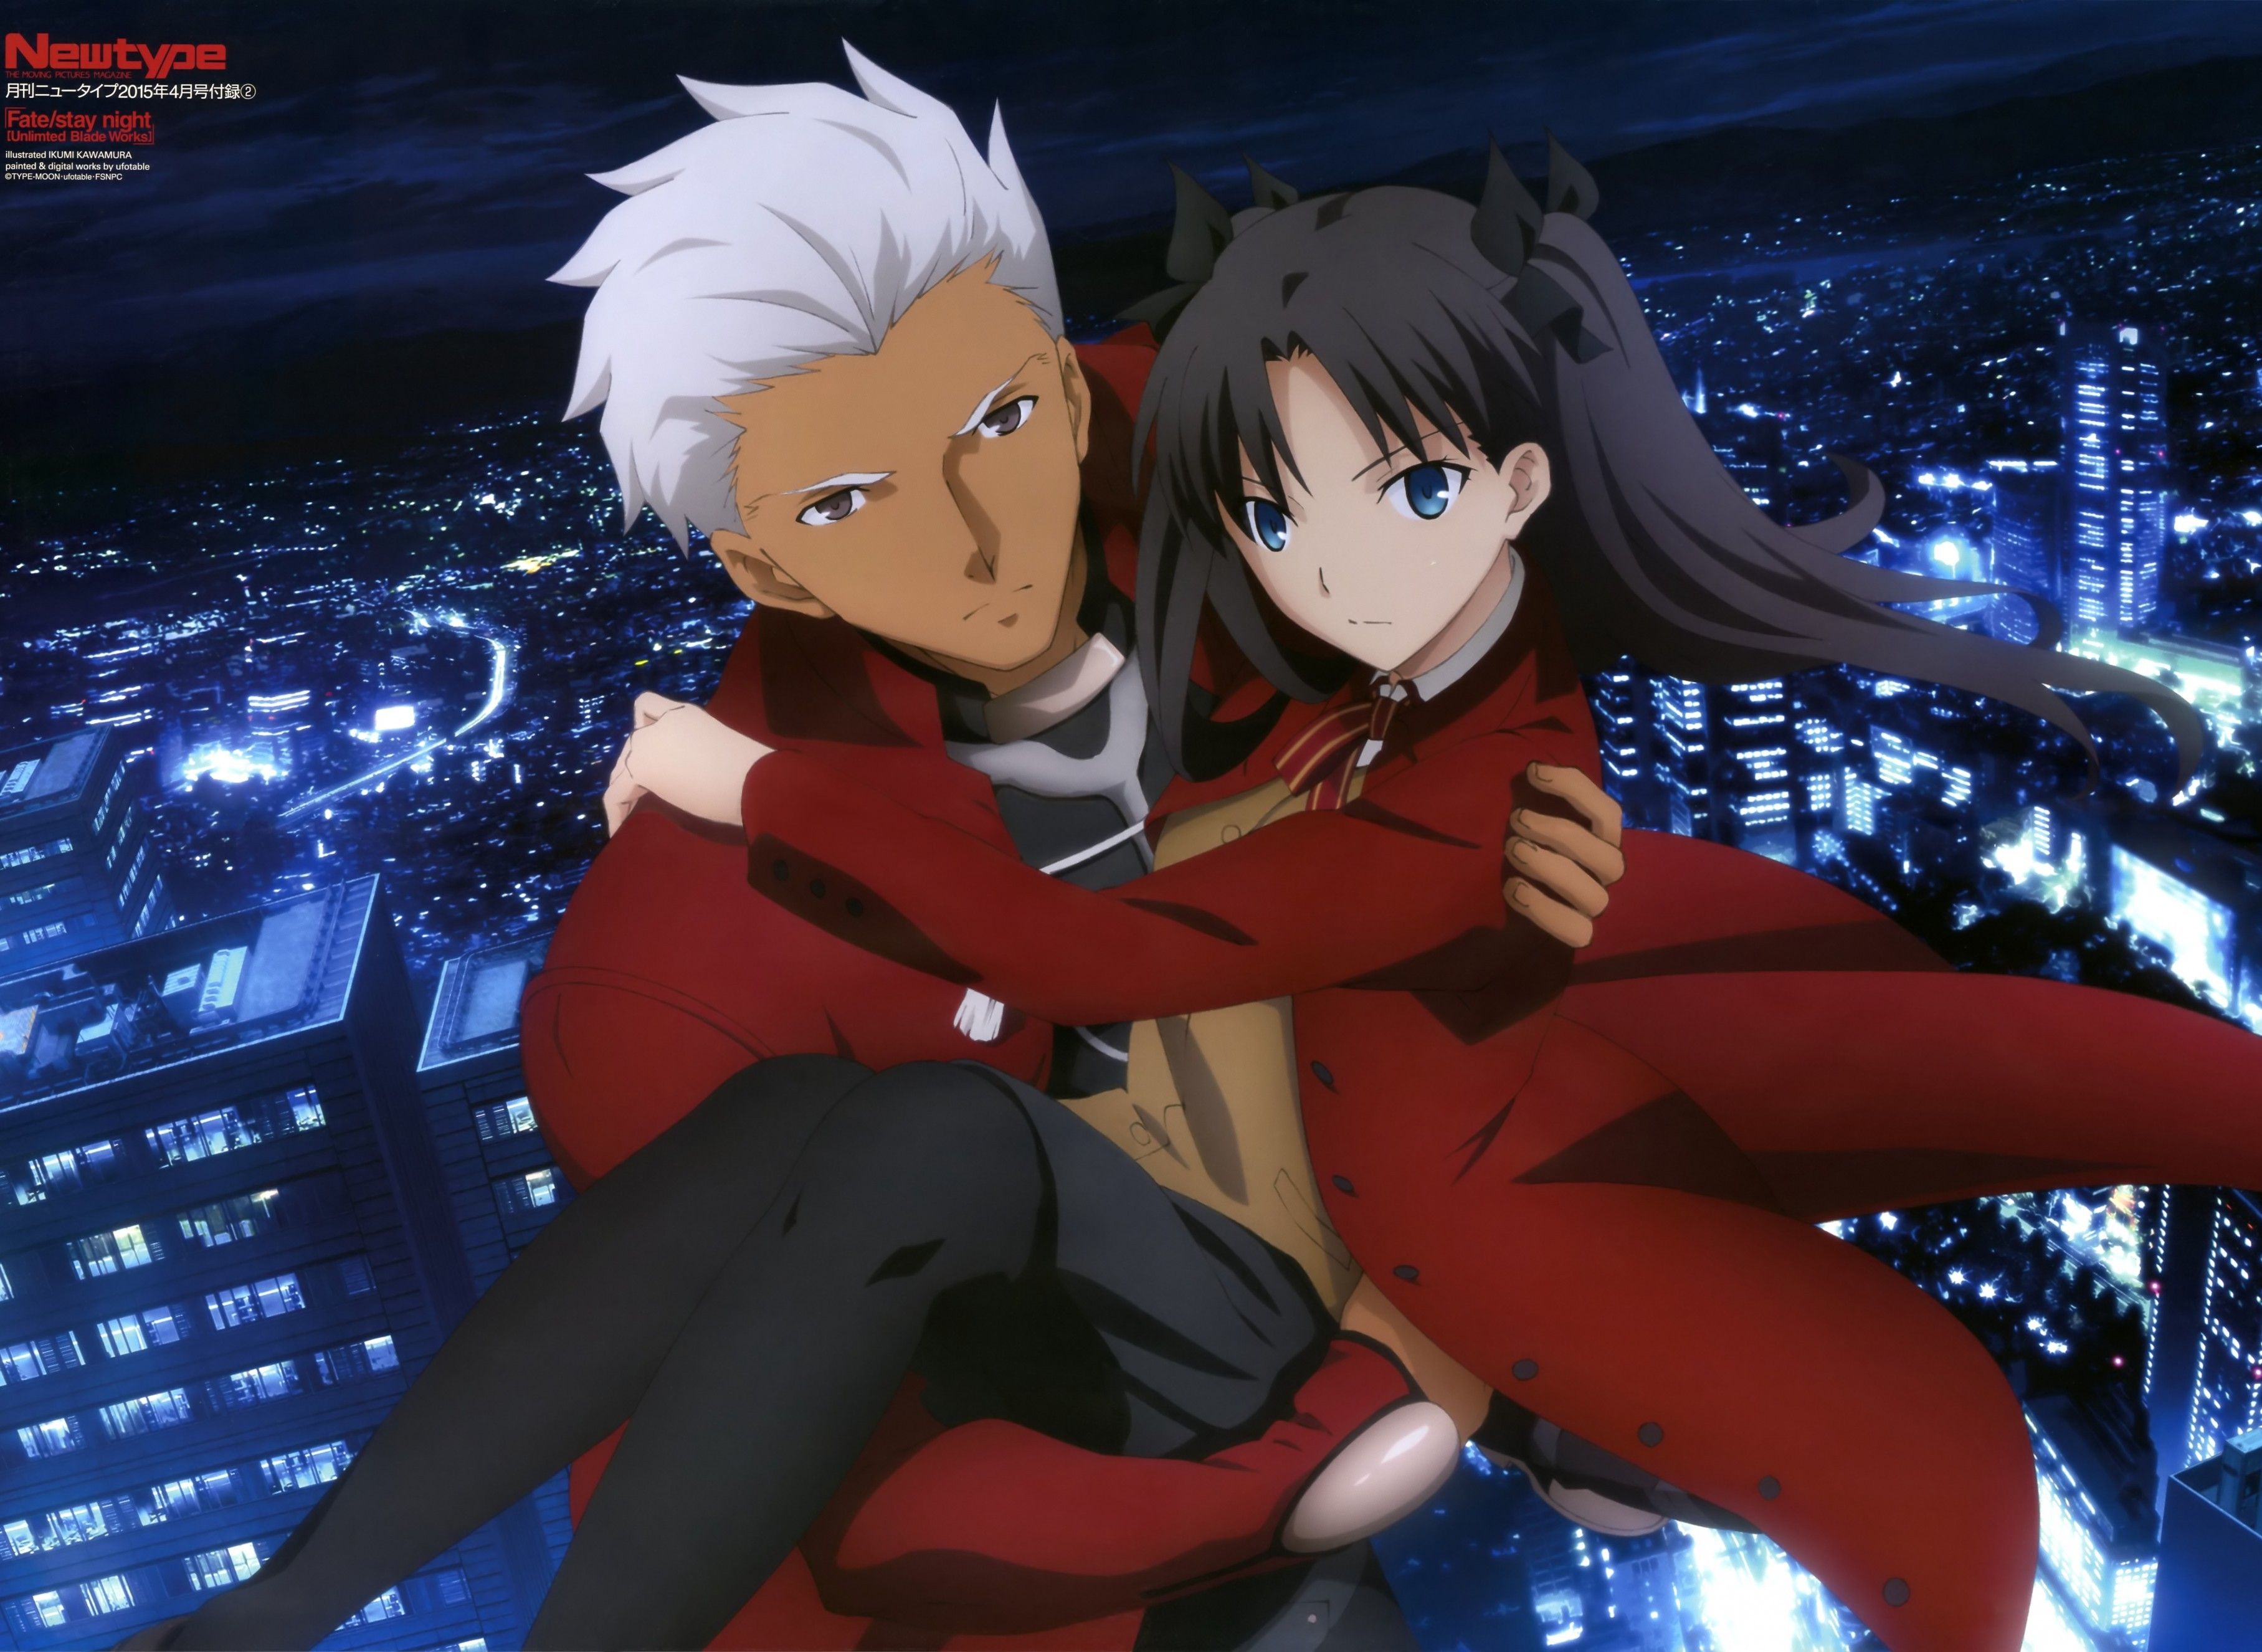 Download 3631x2652 Archer, Rin Tohsaka, Princess Carry, Fate Stay Night: Unlimited Blade Works Wallpaper